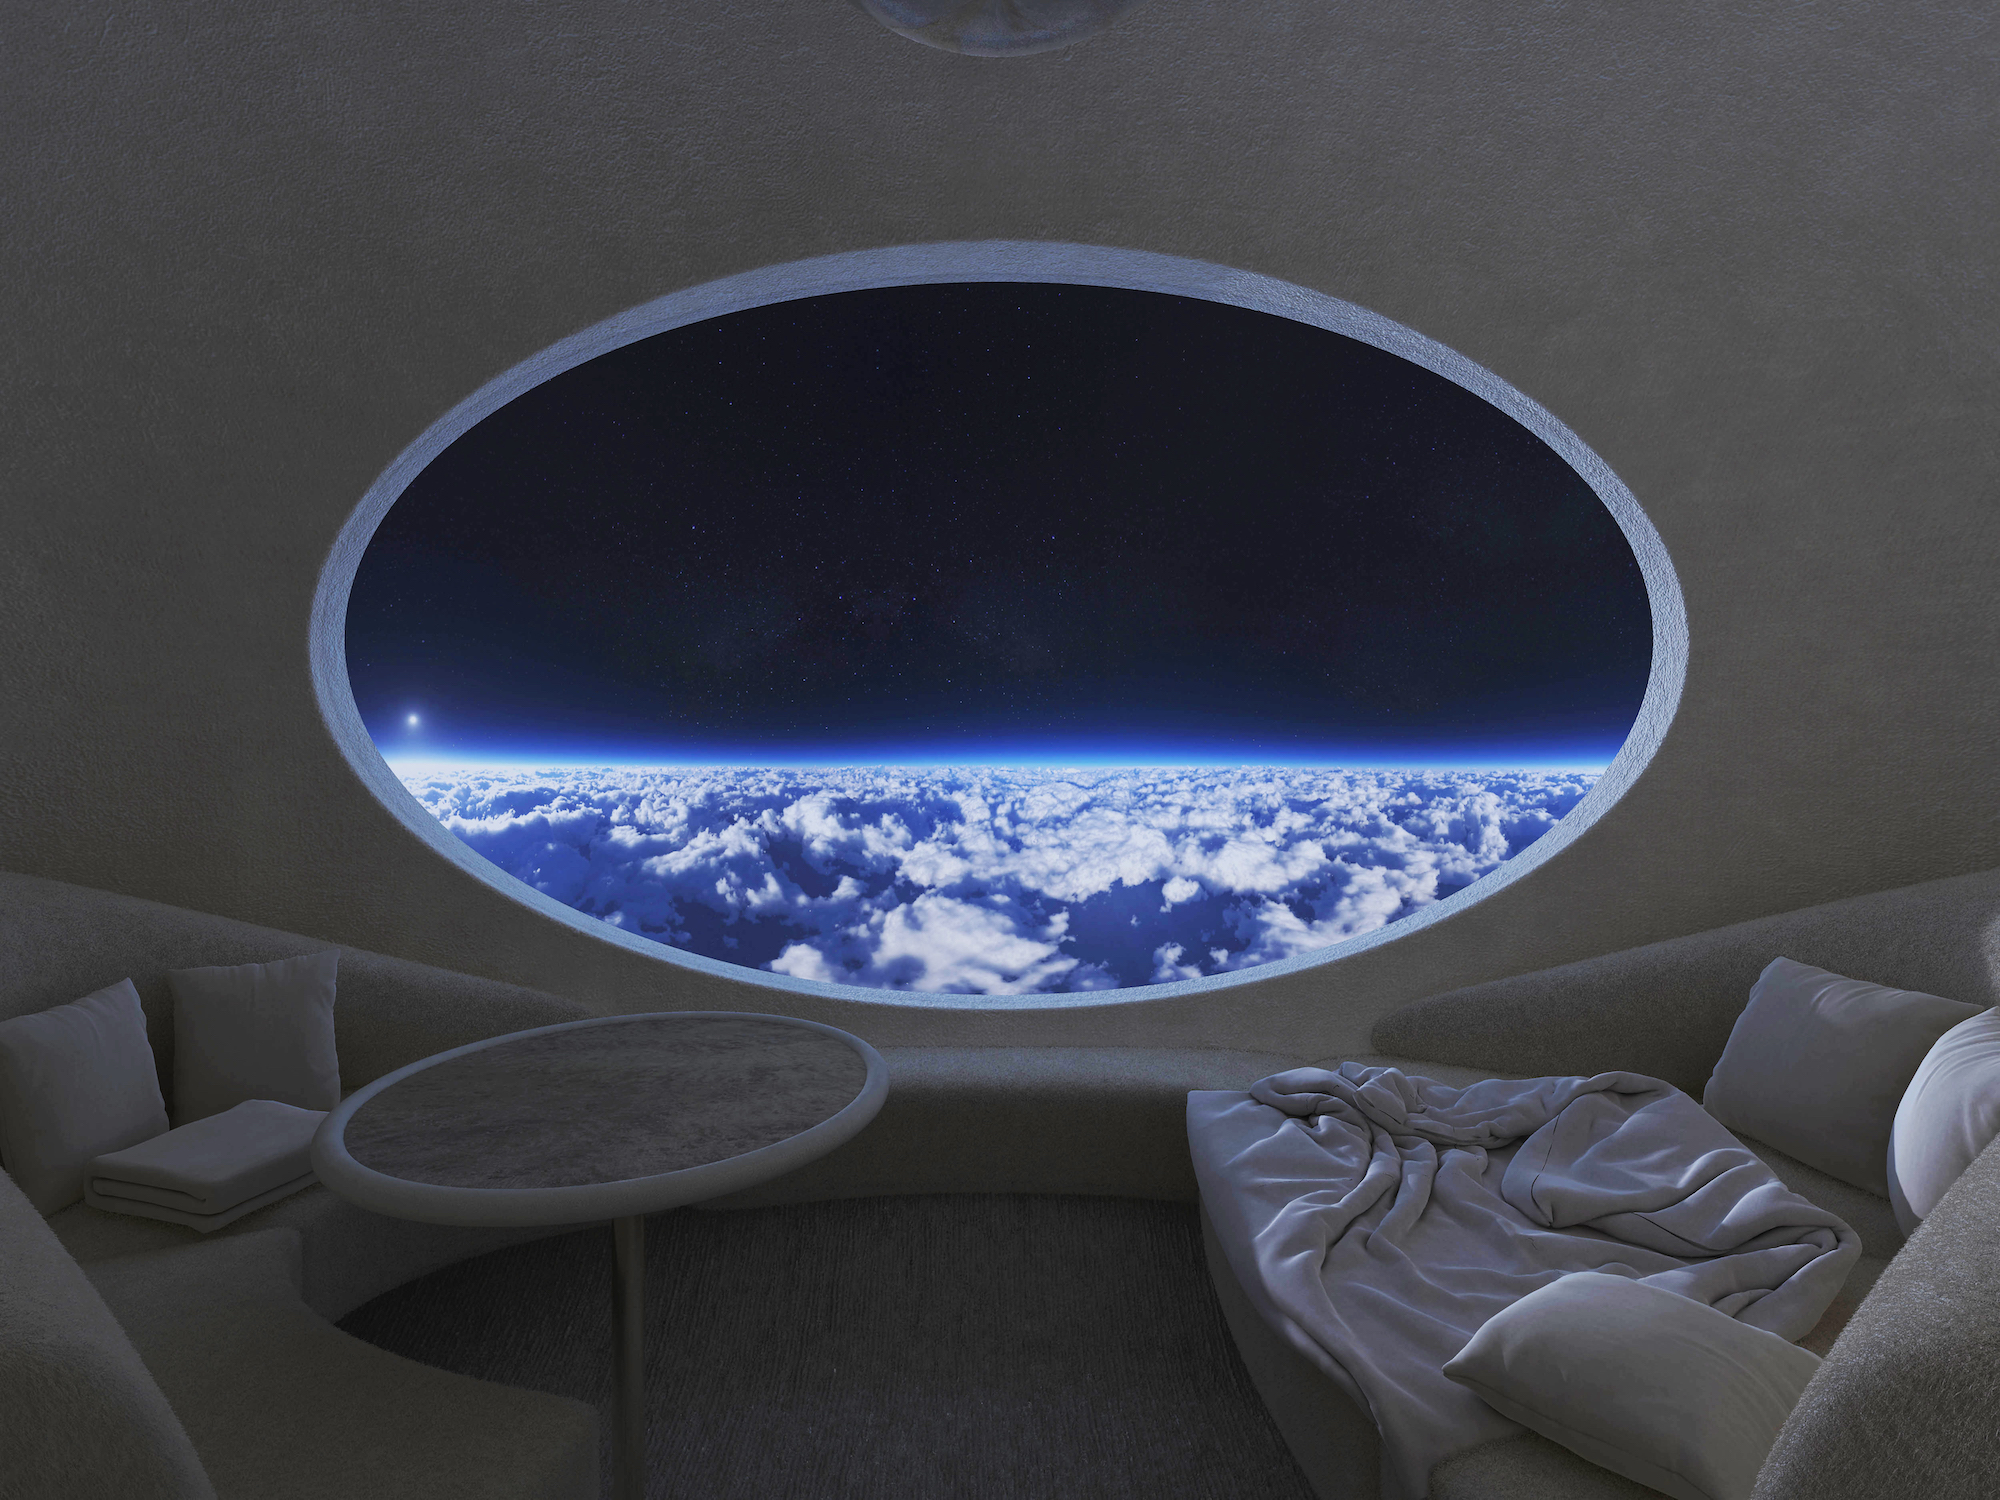 Inteior of Céleste Space Capsule by Zephalto at night in Effect Magazine